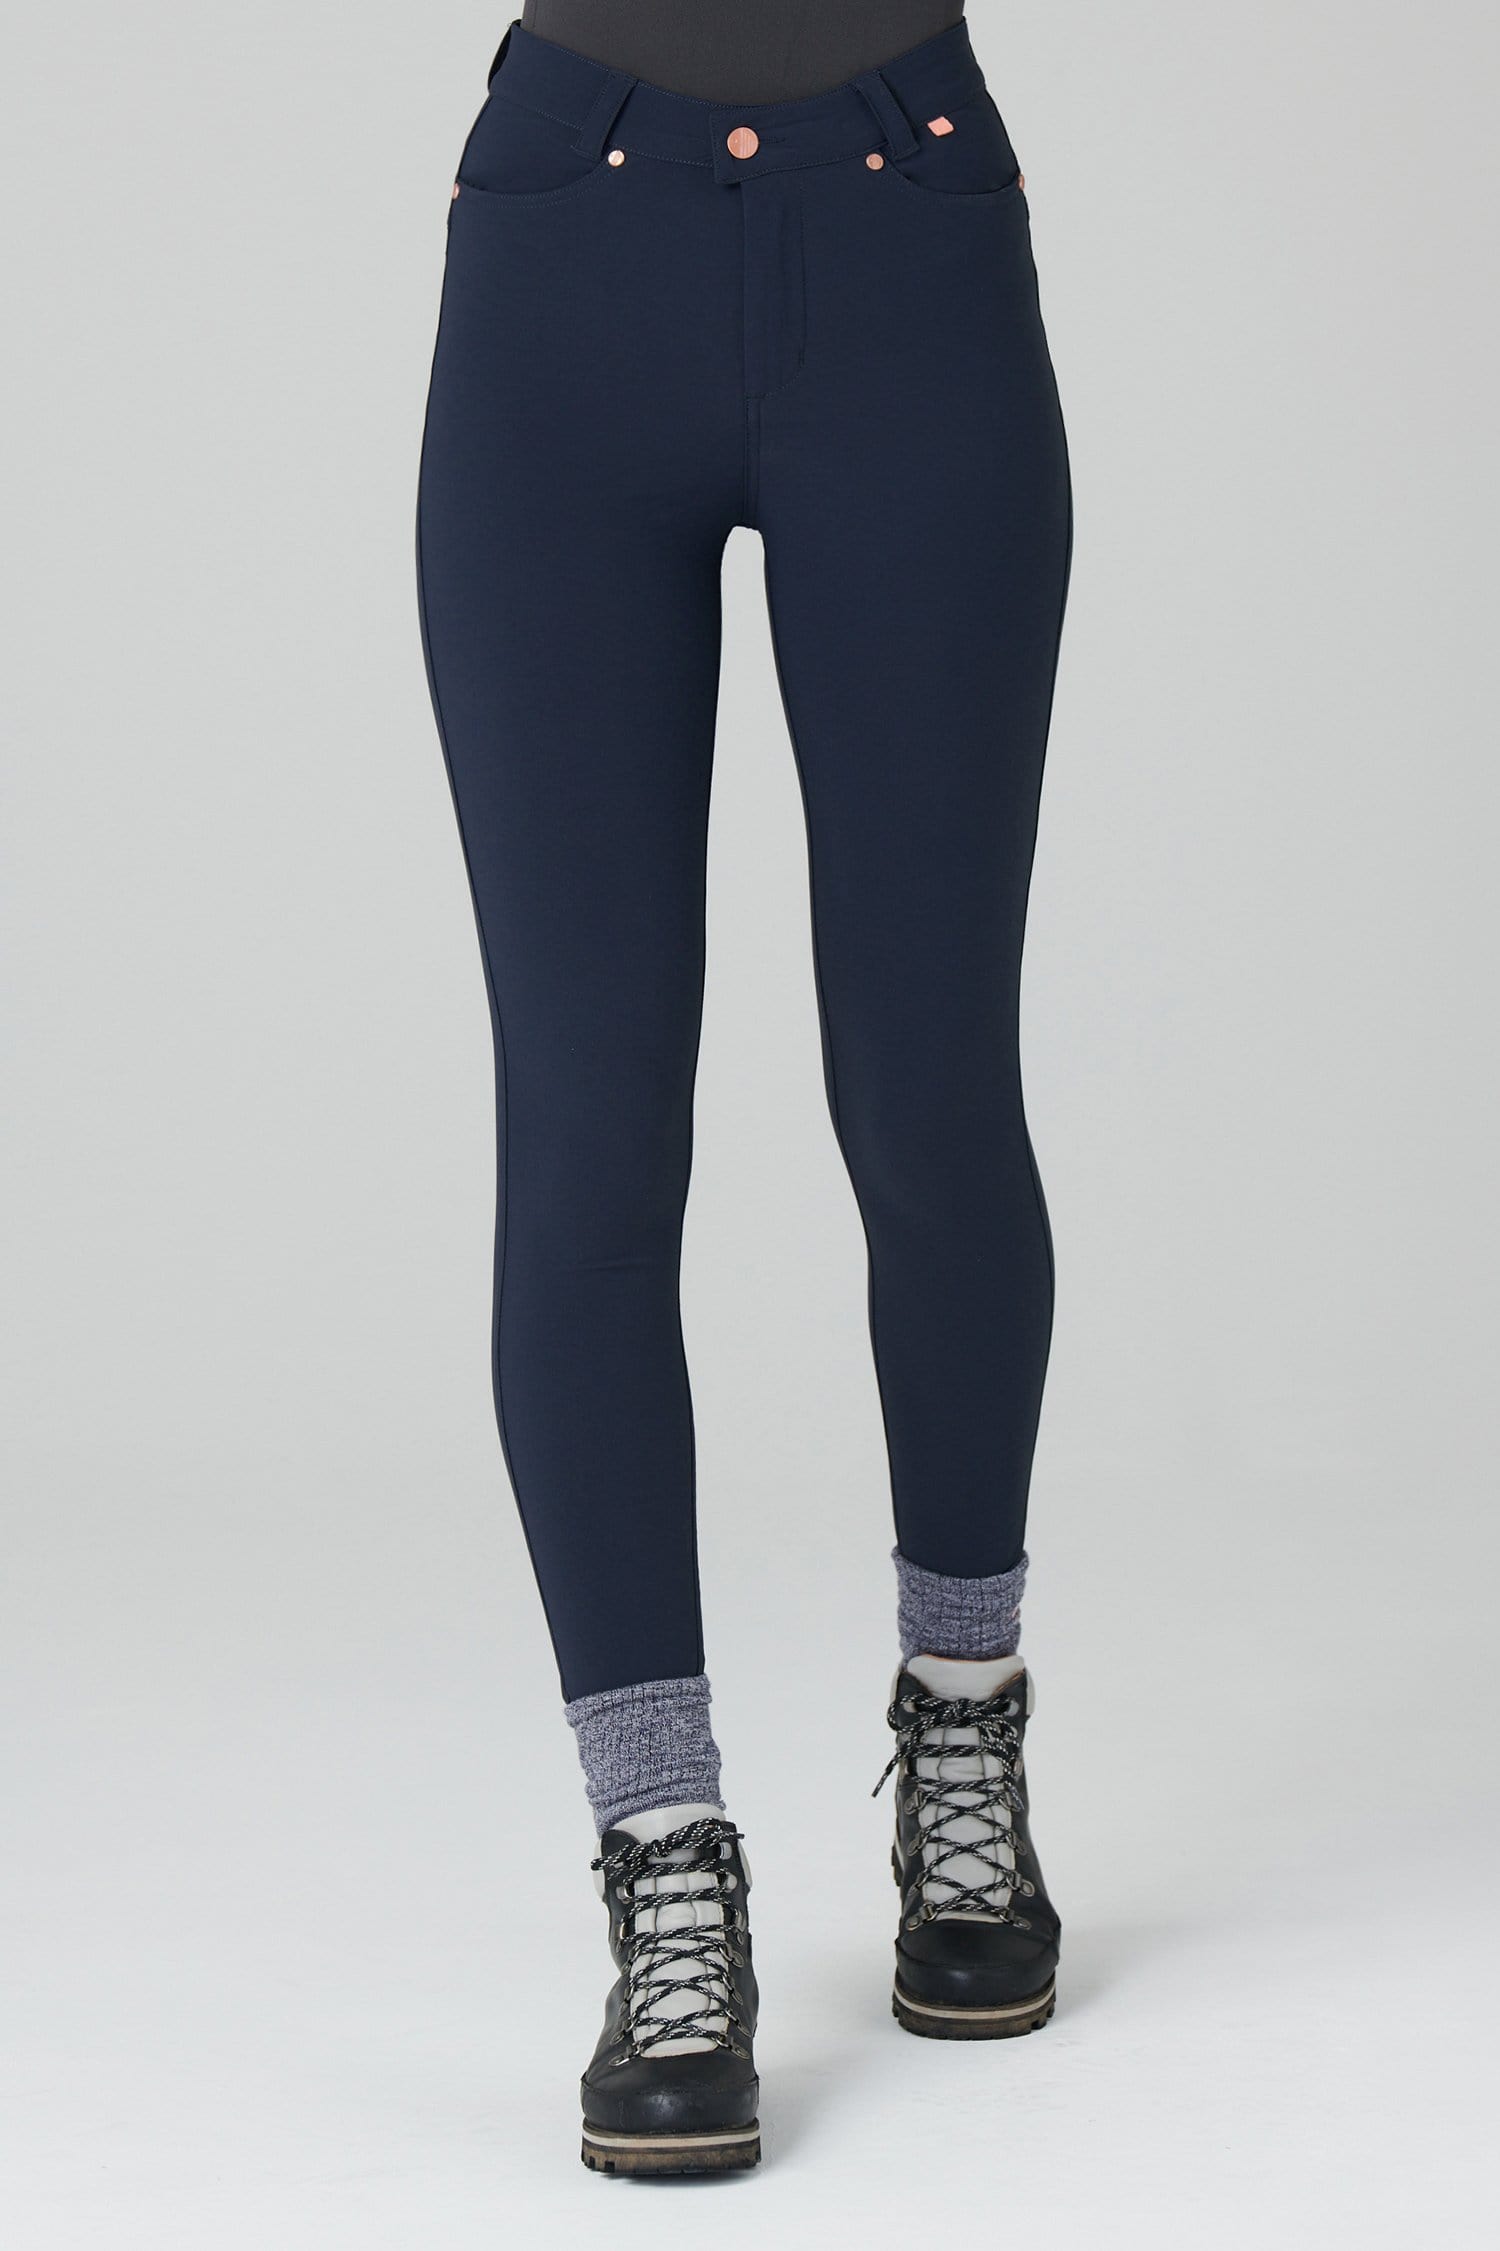 Thermal Skinny Outdoor Trousers - Deep Navy - 32p / Uk14 - Womens - Acai Outdoorwear